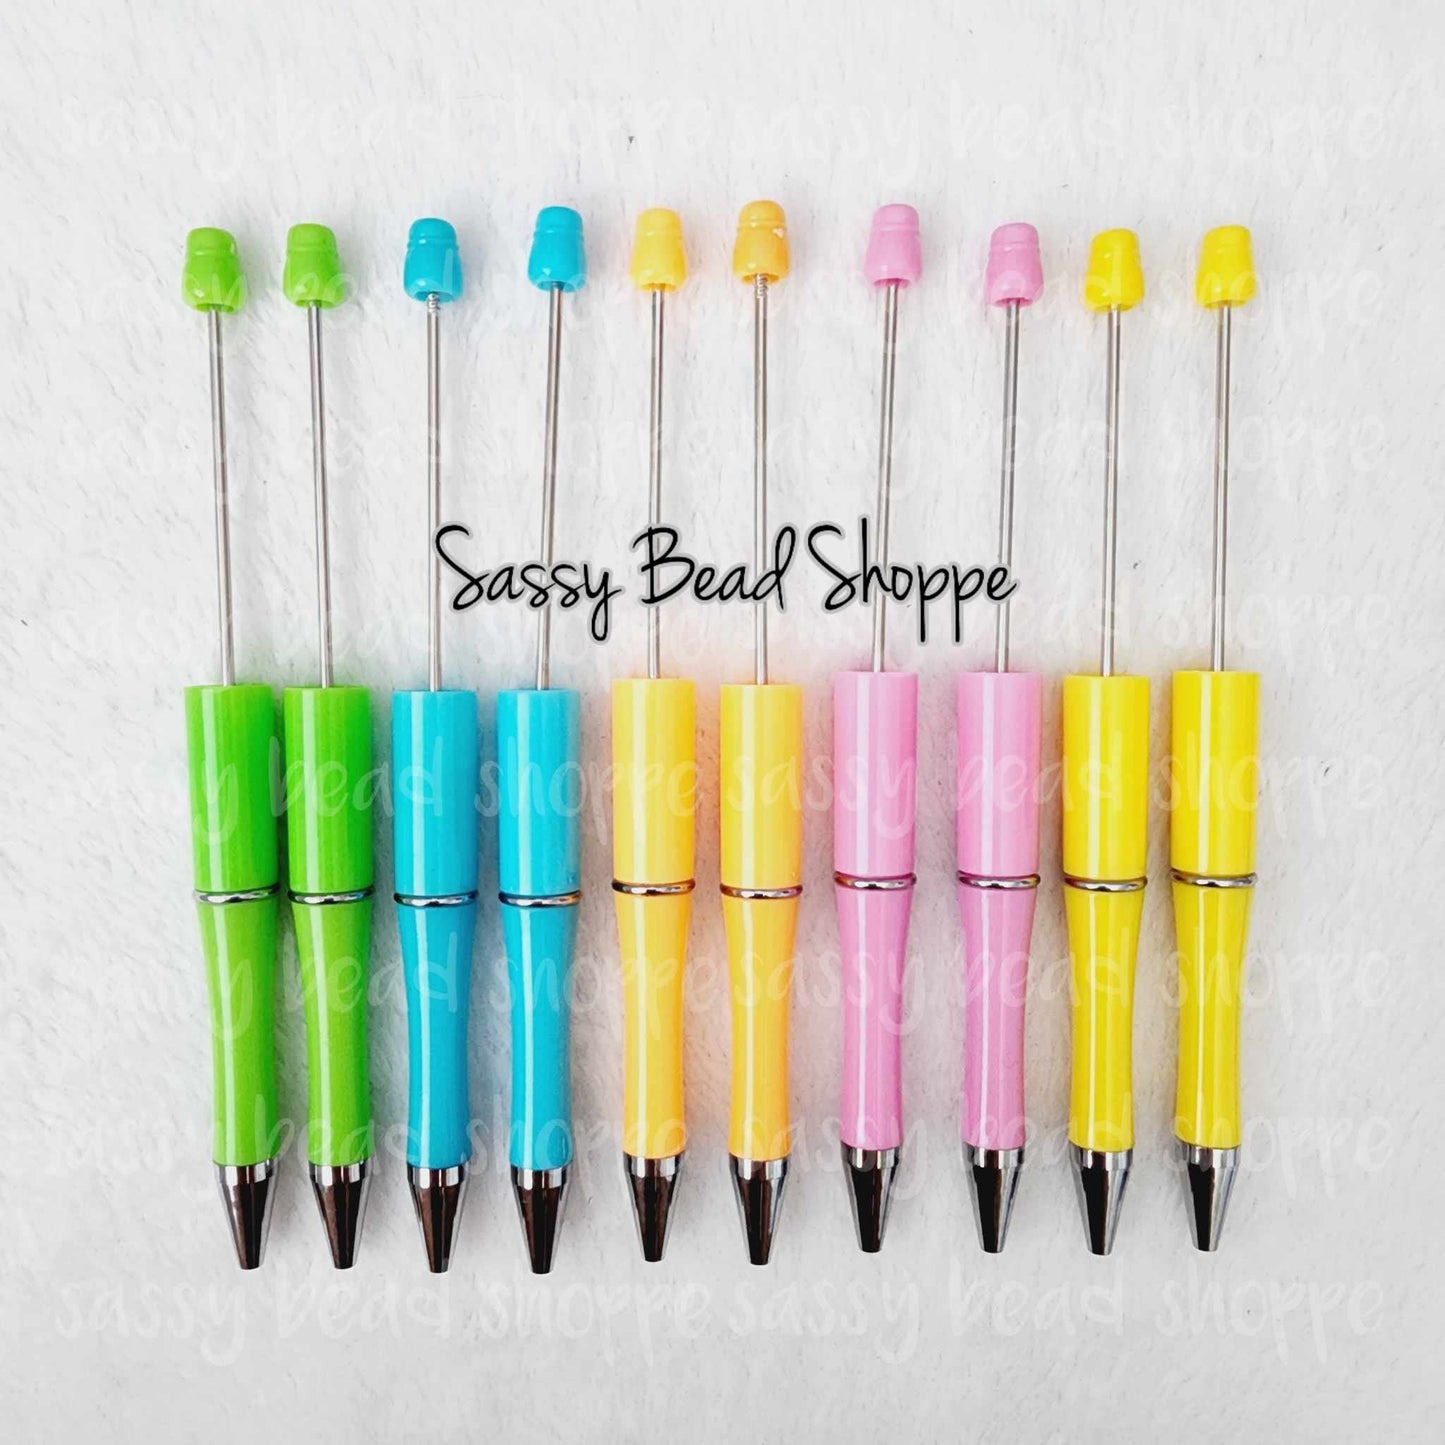 Sassy Bead Shoppe Neon Queen Pen Pack Pack of 10